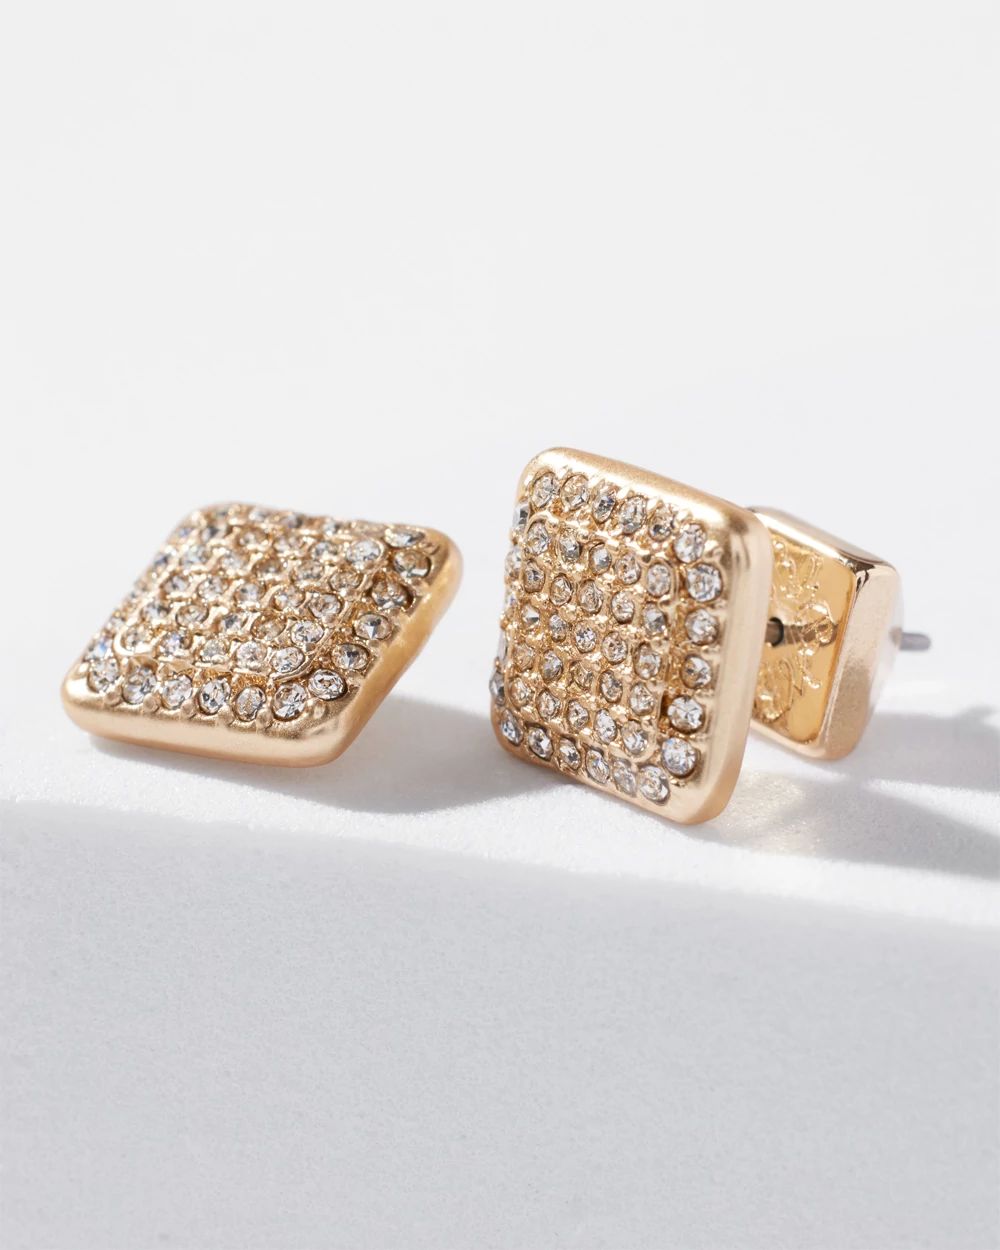 Gold Pave Crystal Stud Earrings